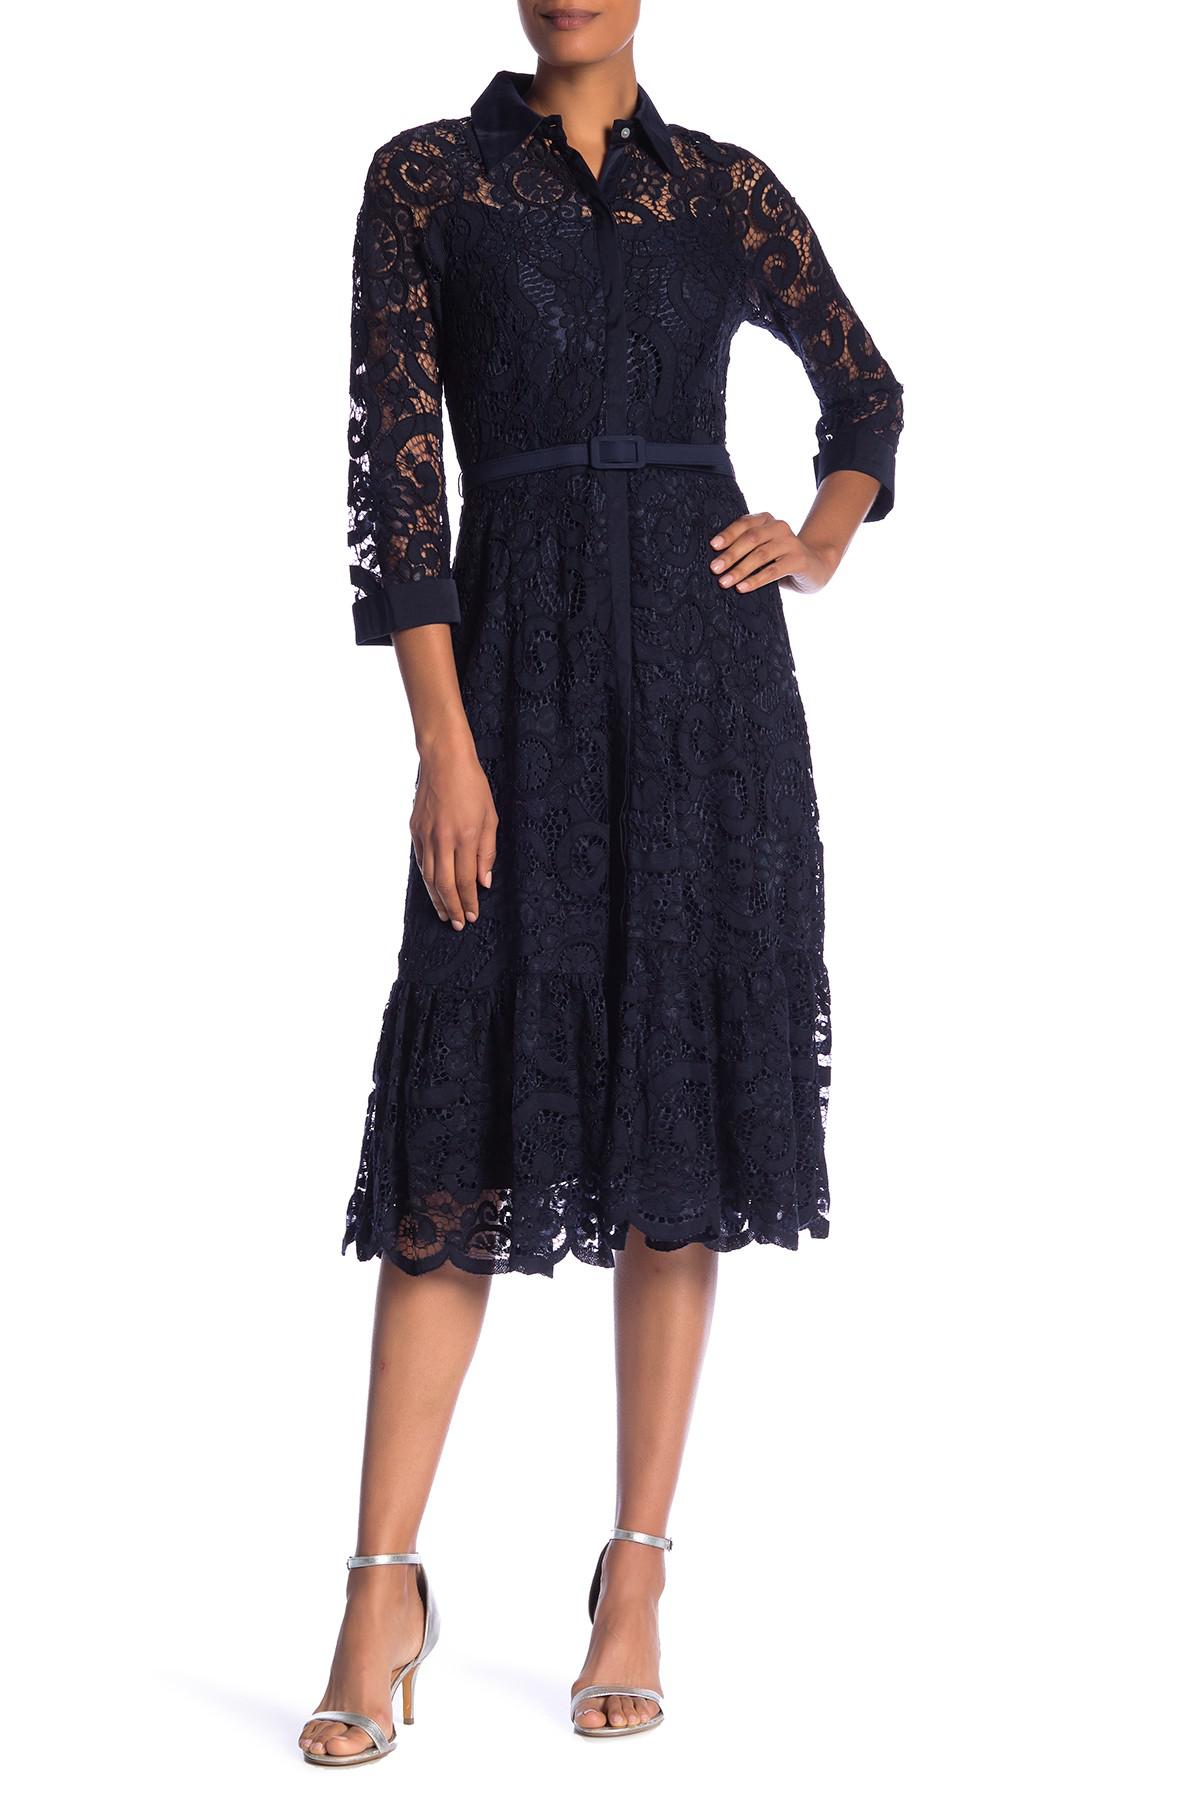 Lyst - Nanette Nanette Lepore Collared Floral Lace Midi Dress in Blue